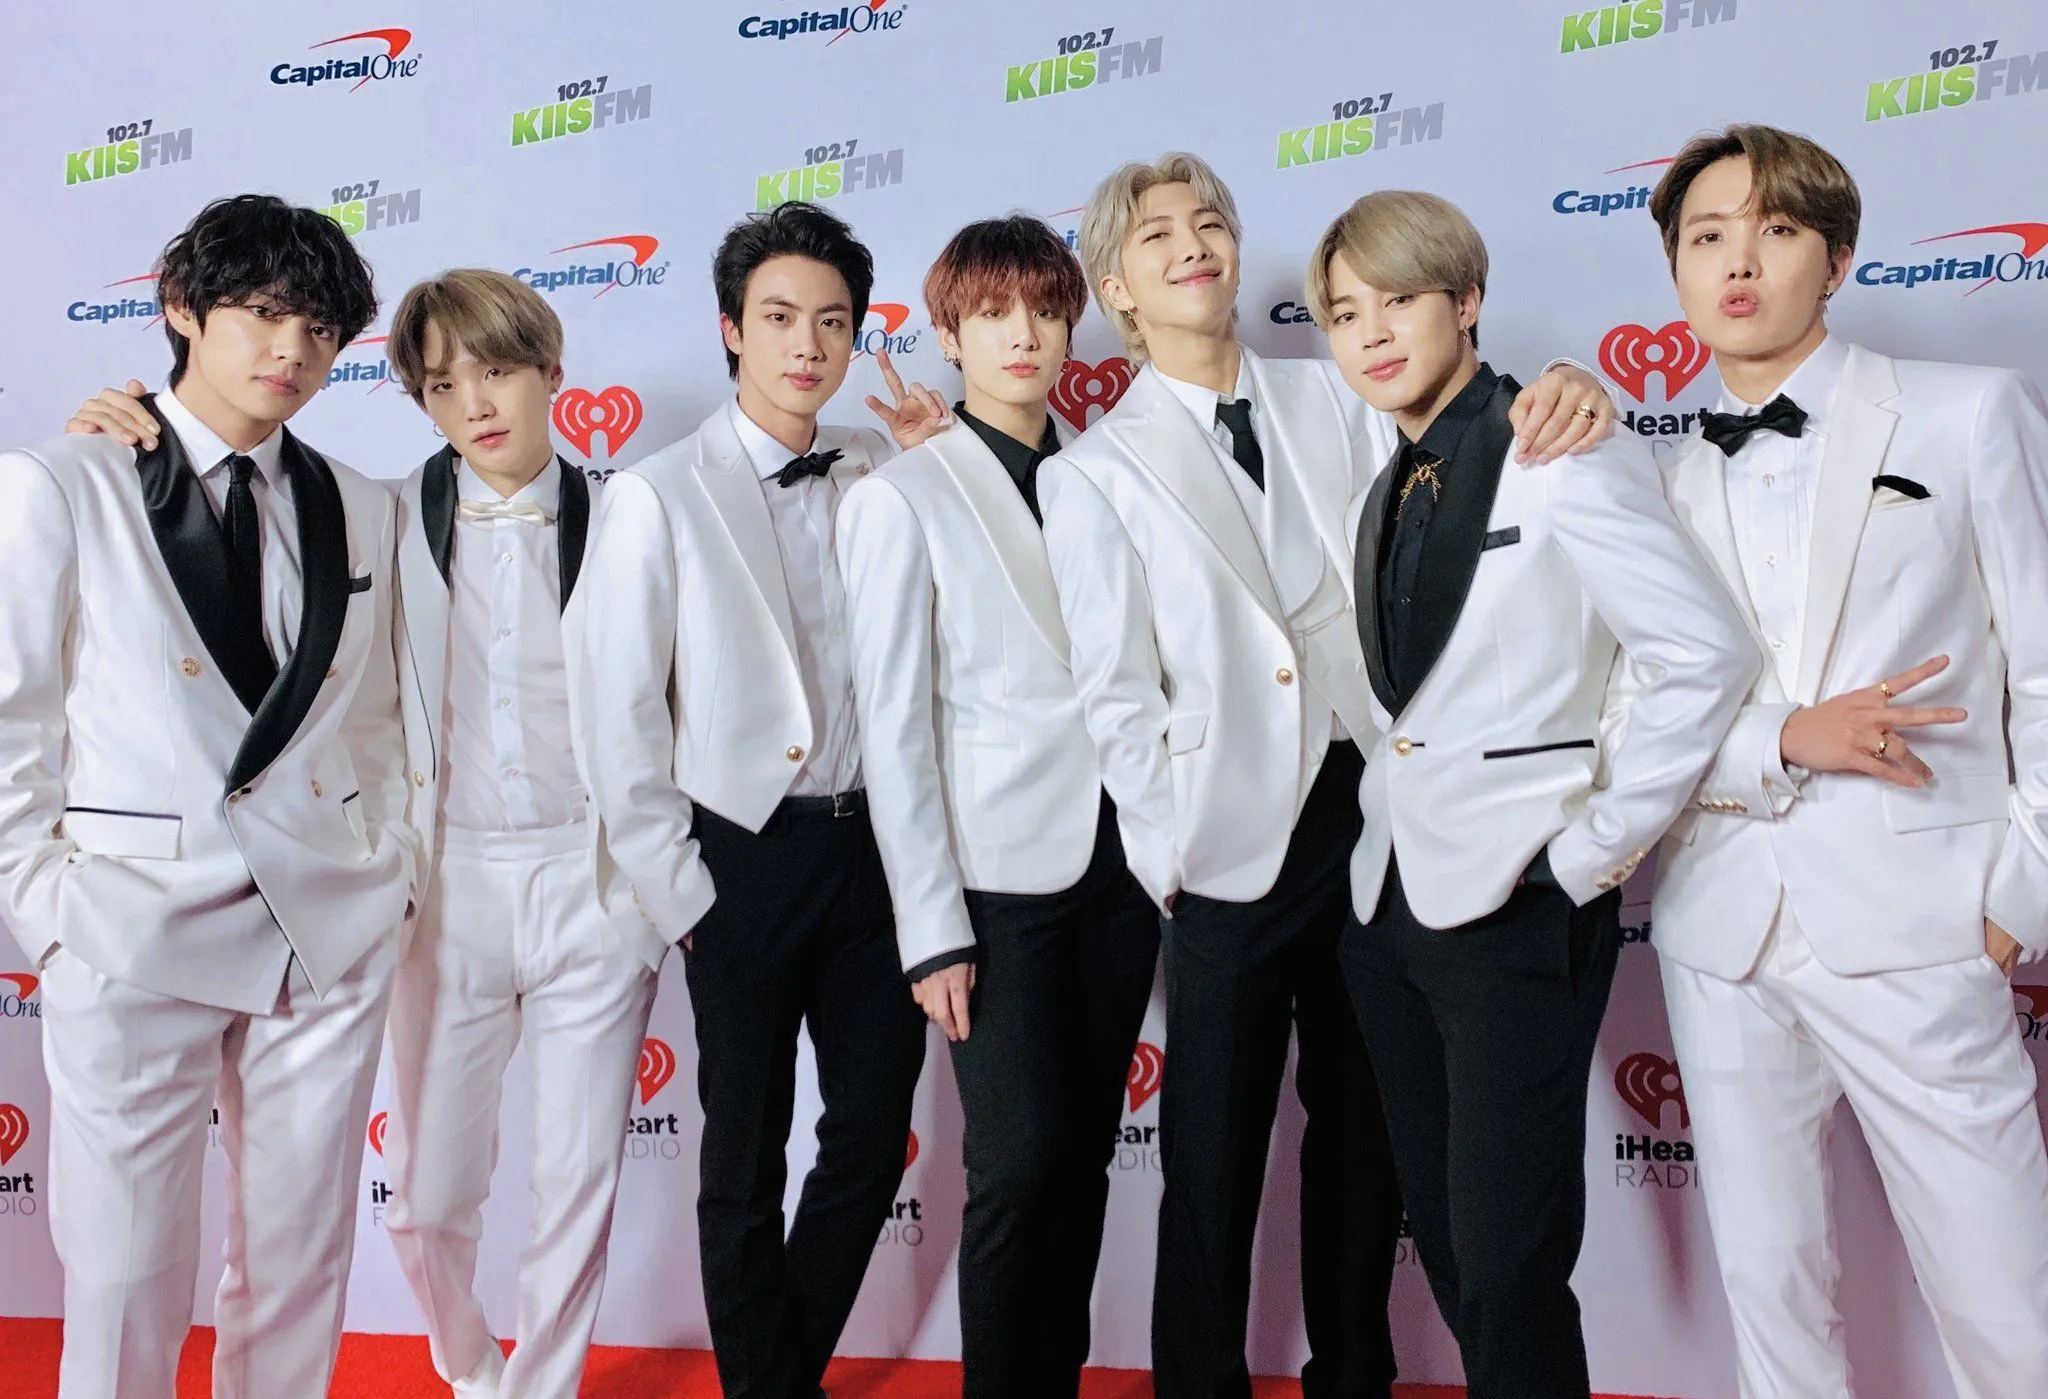 47 ARMY Chipped In Money To Purchase Shutterstock Photo Of BTS ...